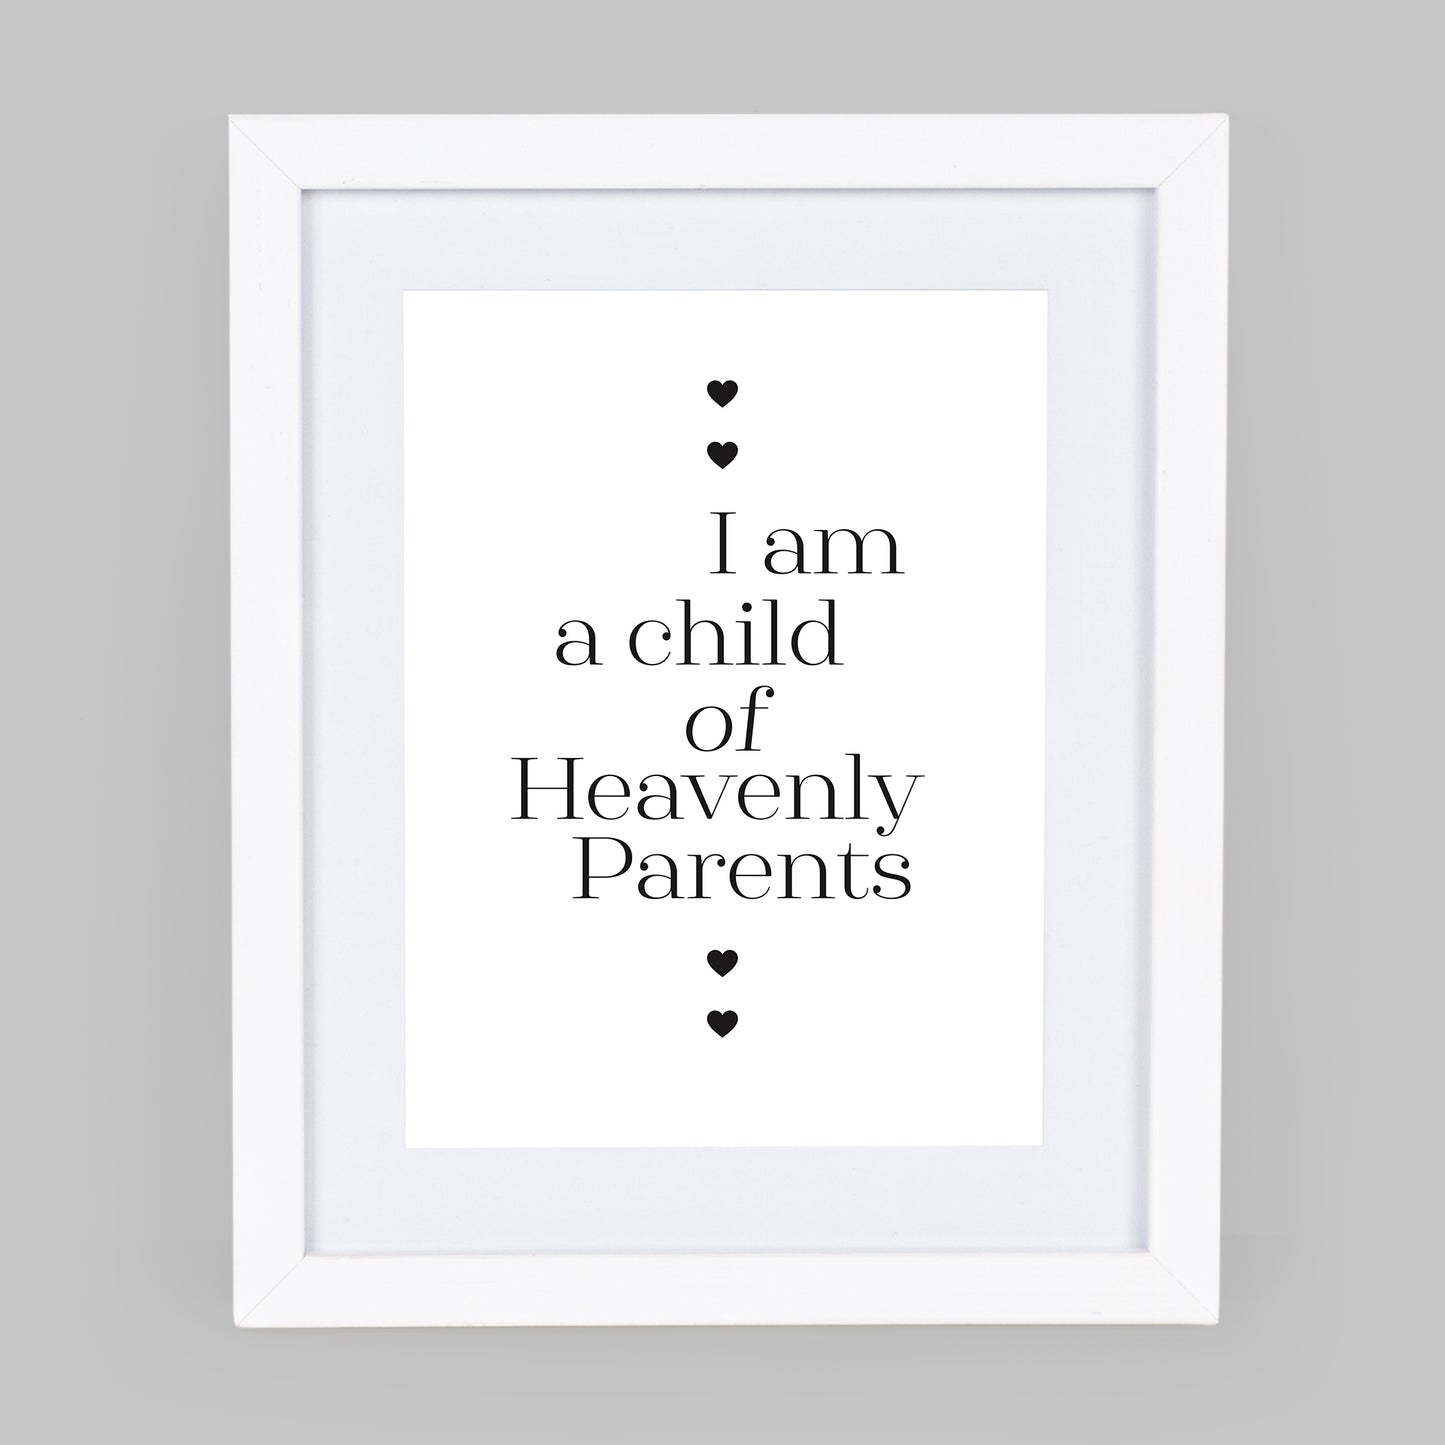 "I Am A Child Of Heavenly Parents" Download